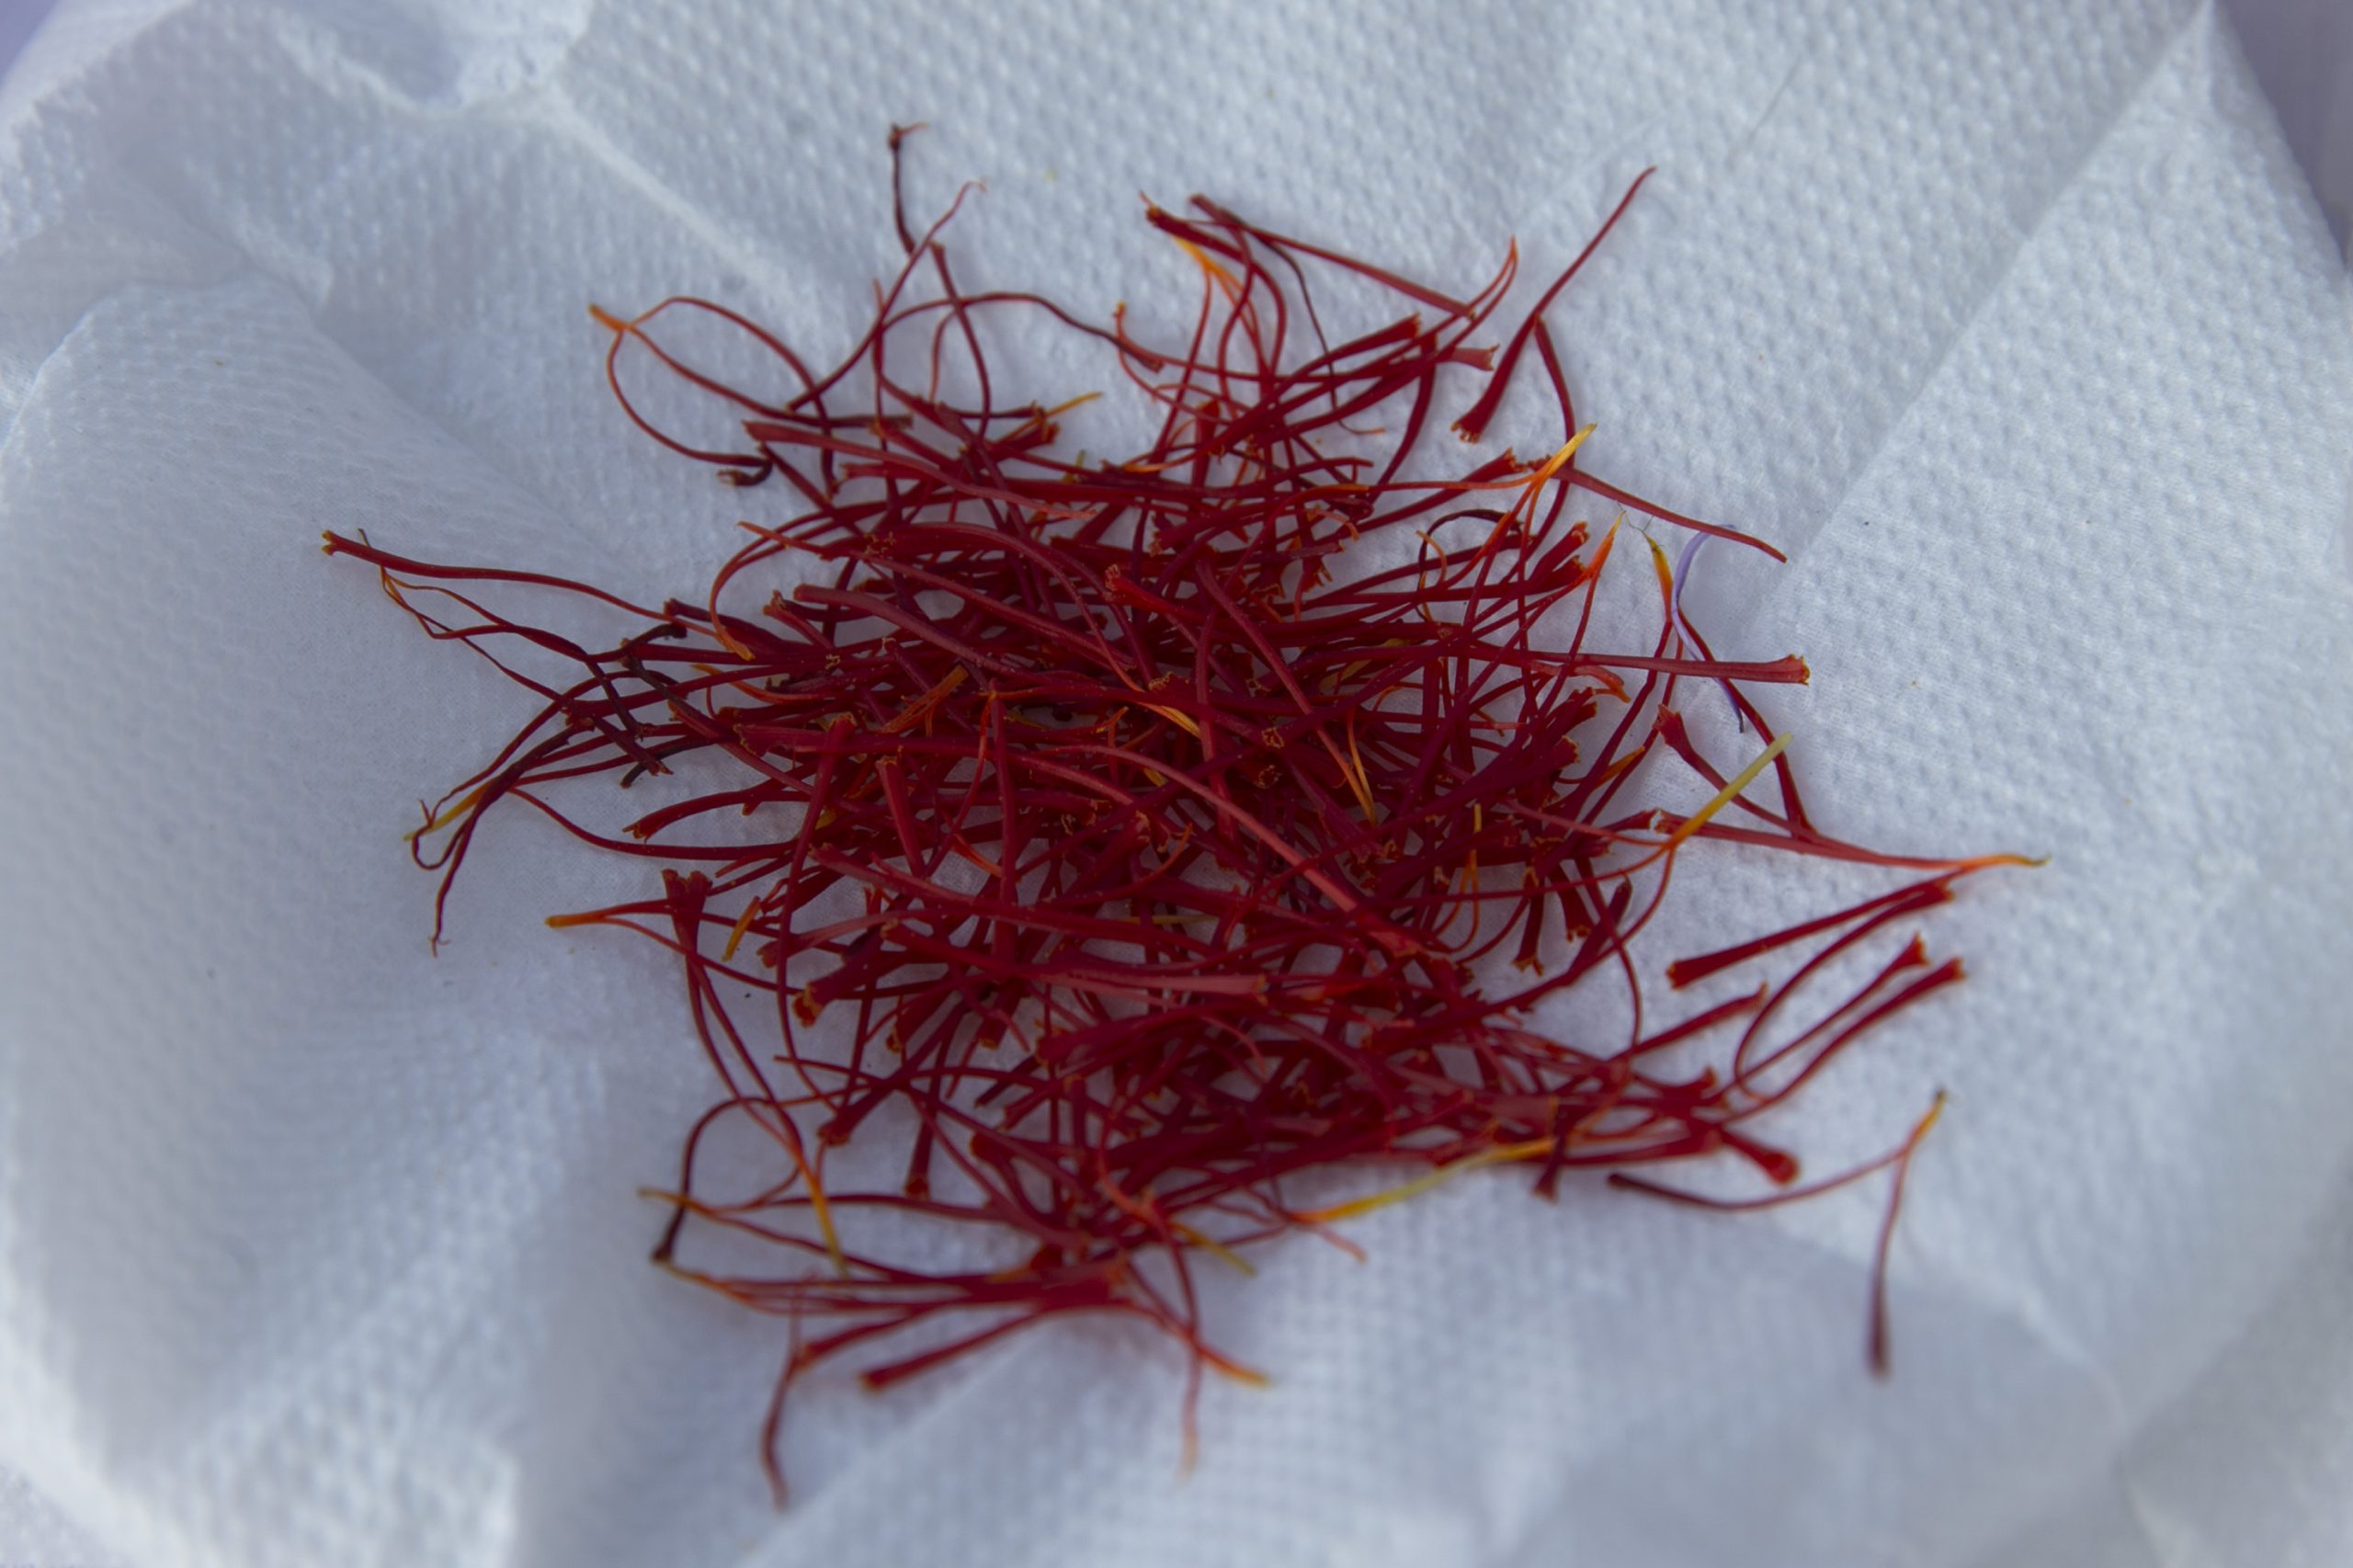 saffron is one of the best aphrodisiacs